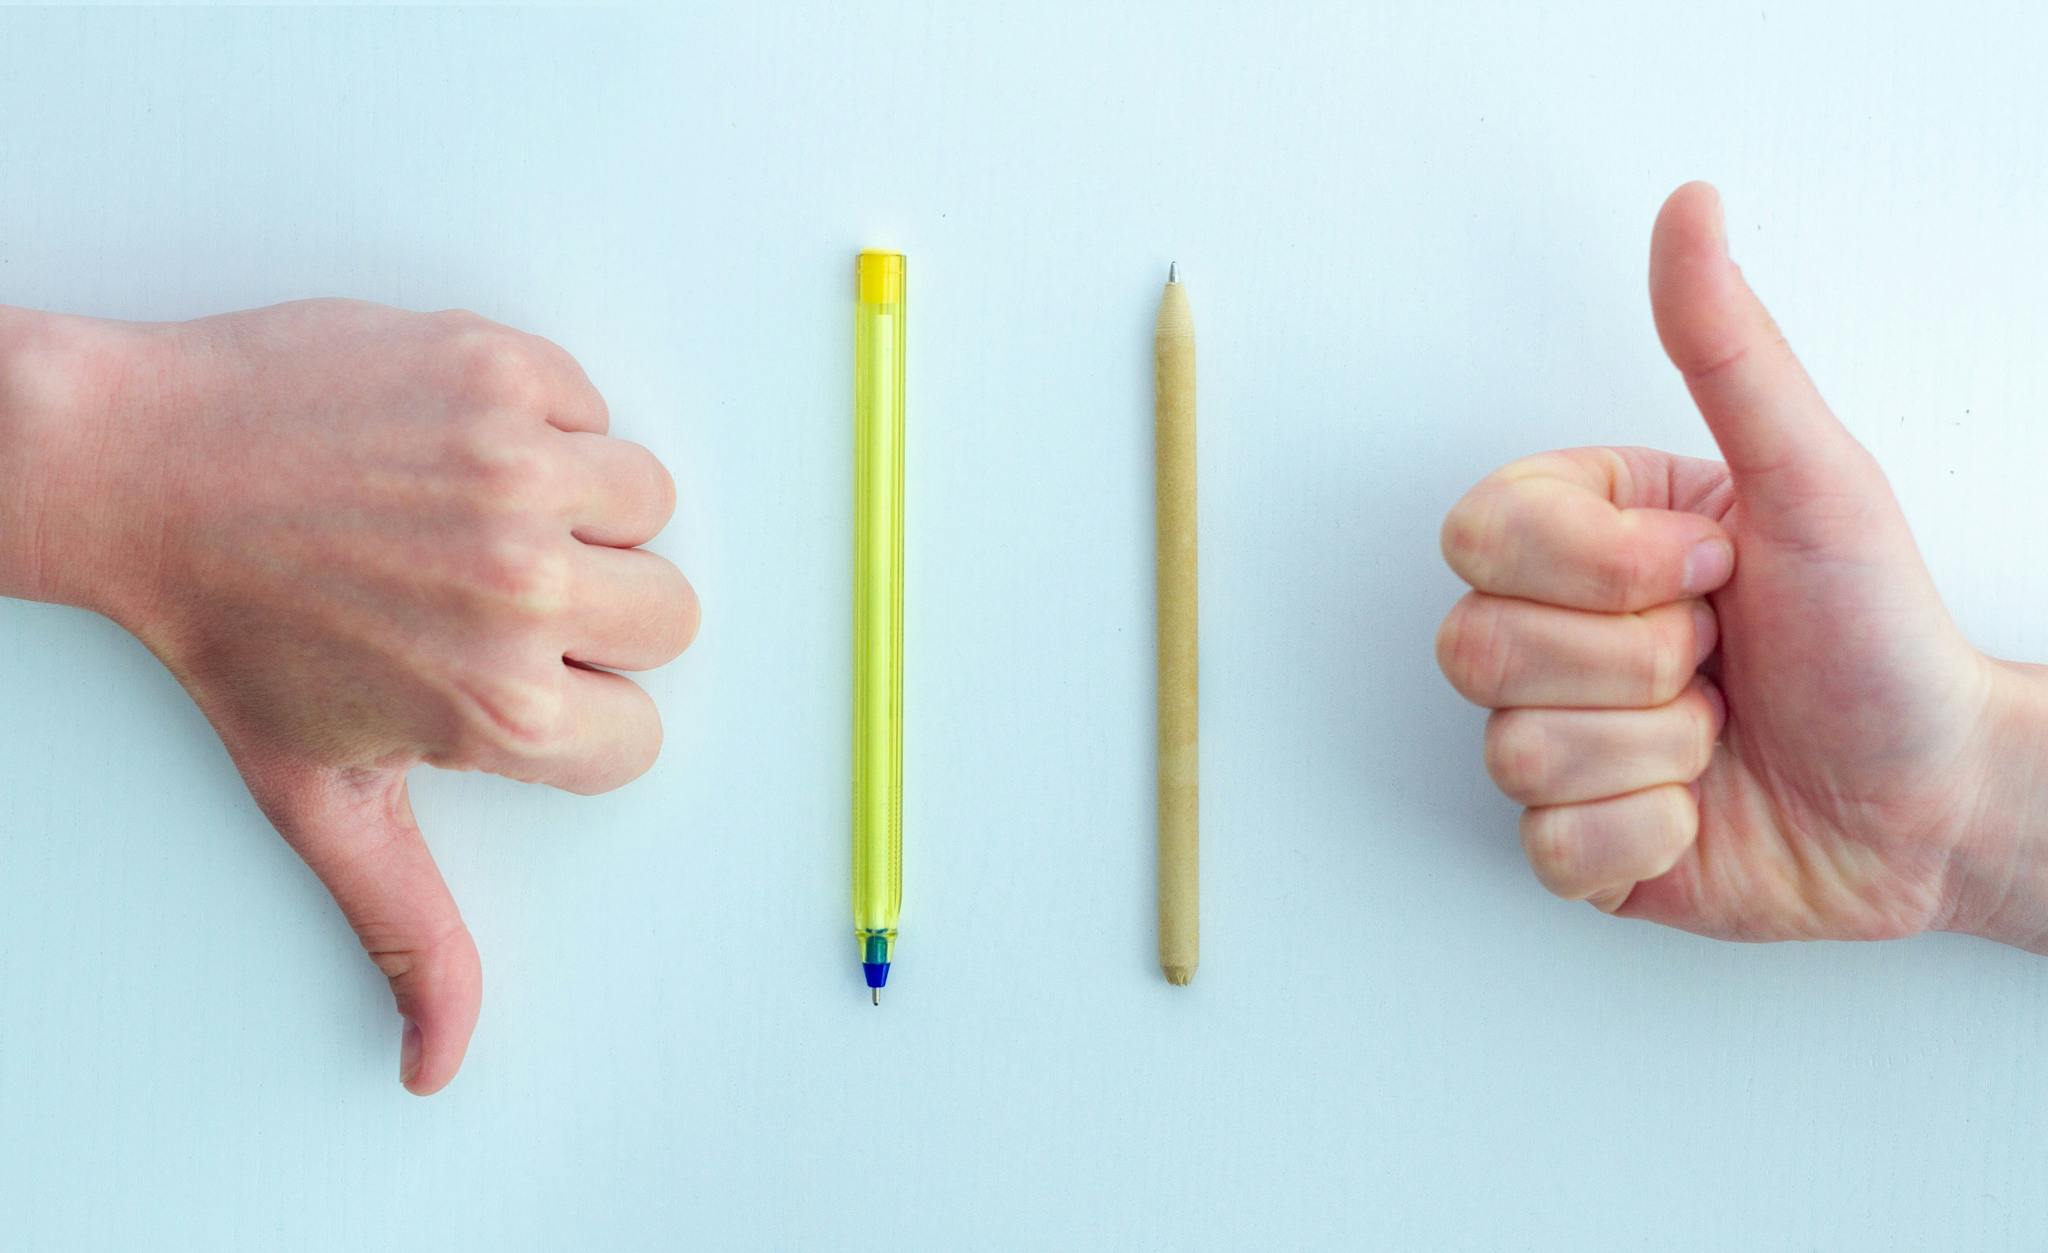 Image of thumbs down for plastic pens and thumbs up for bamboo pens